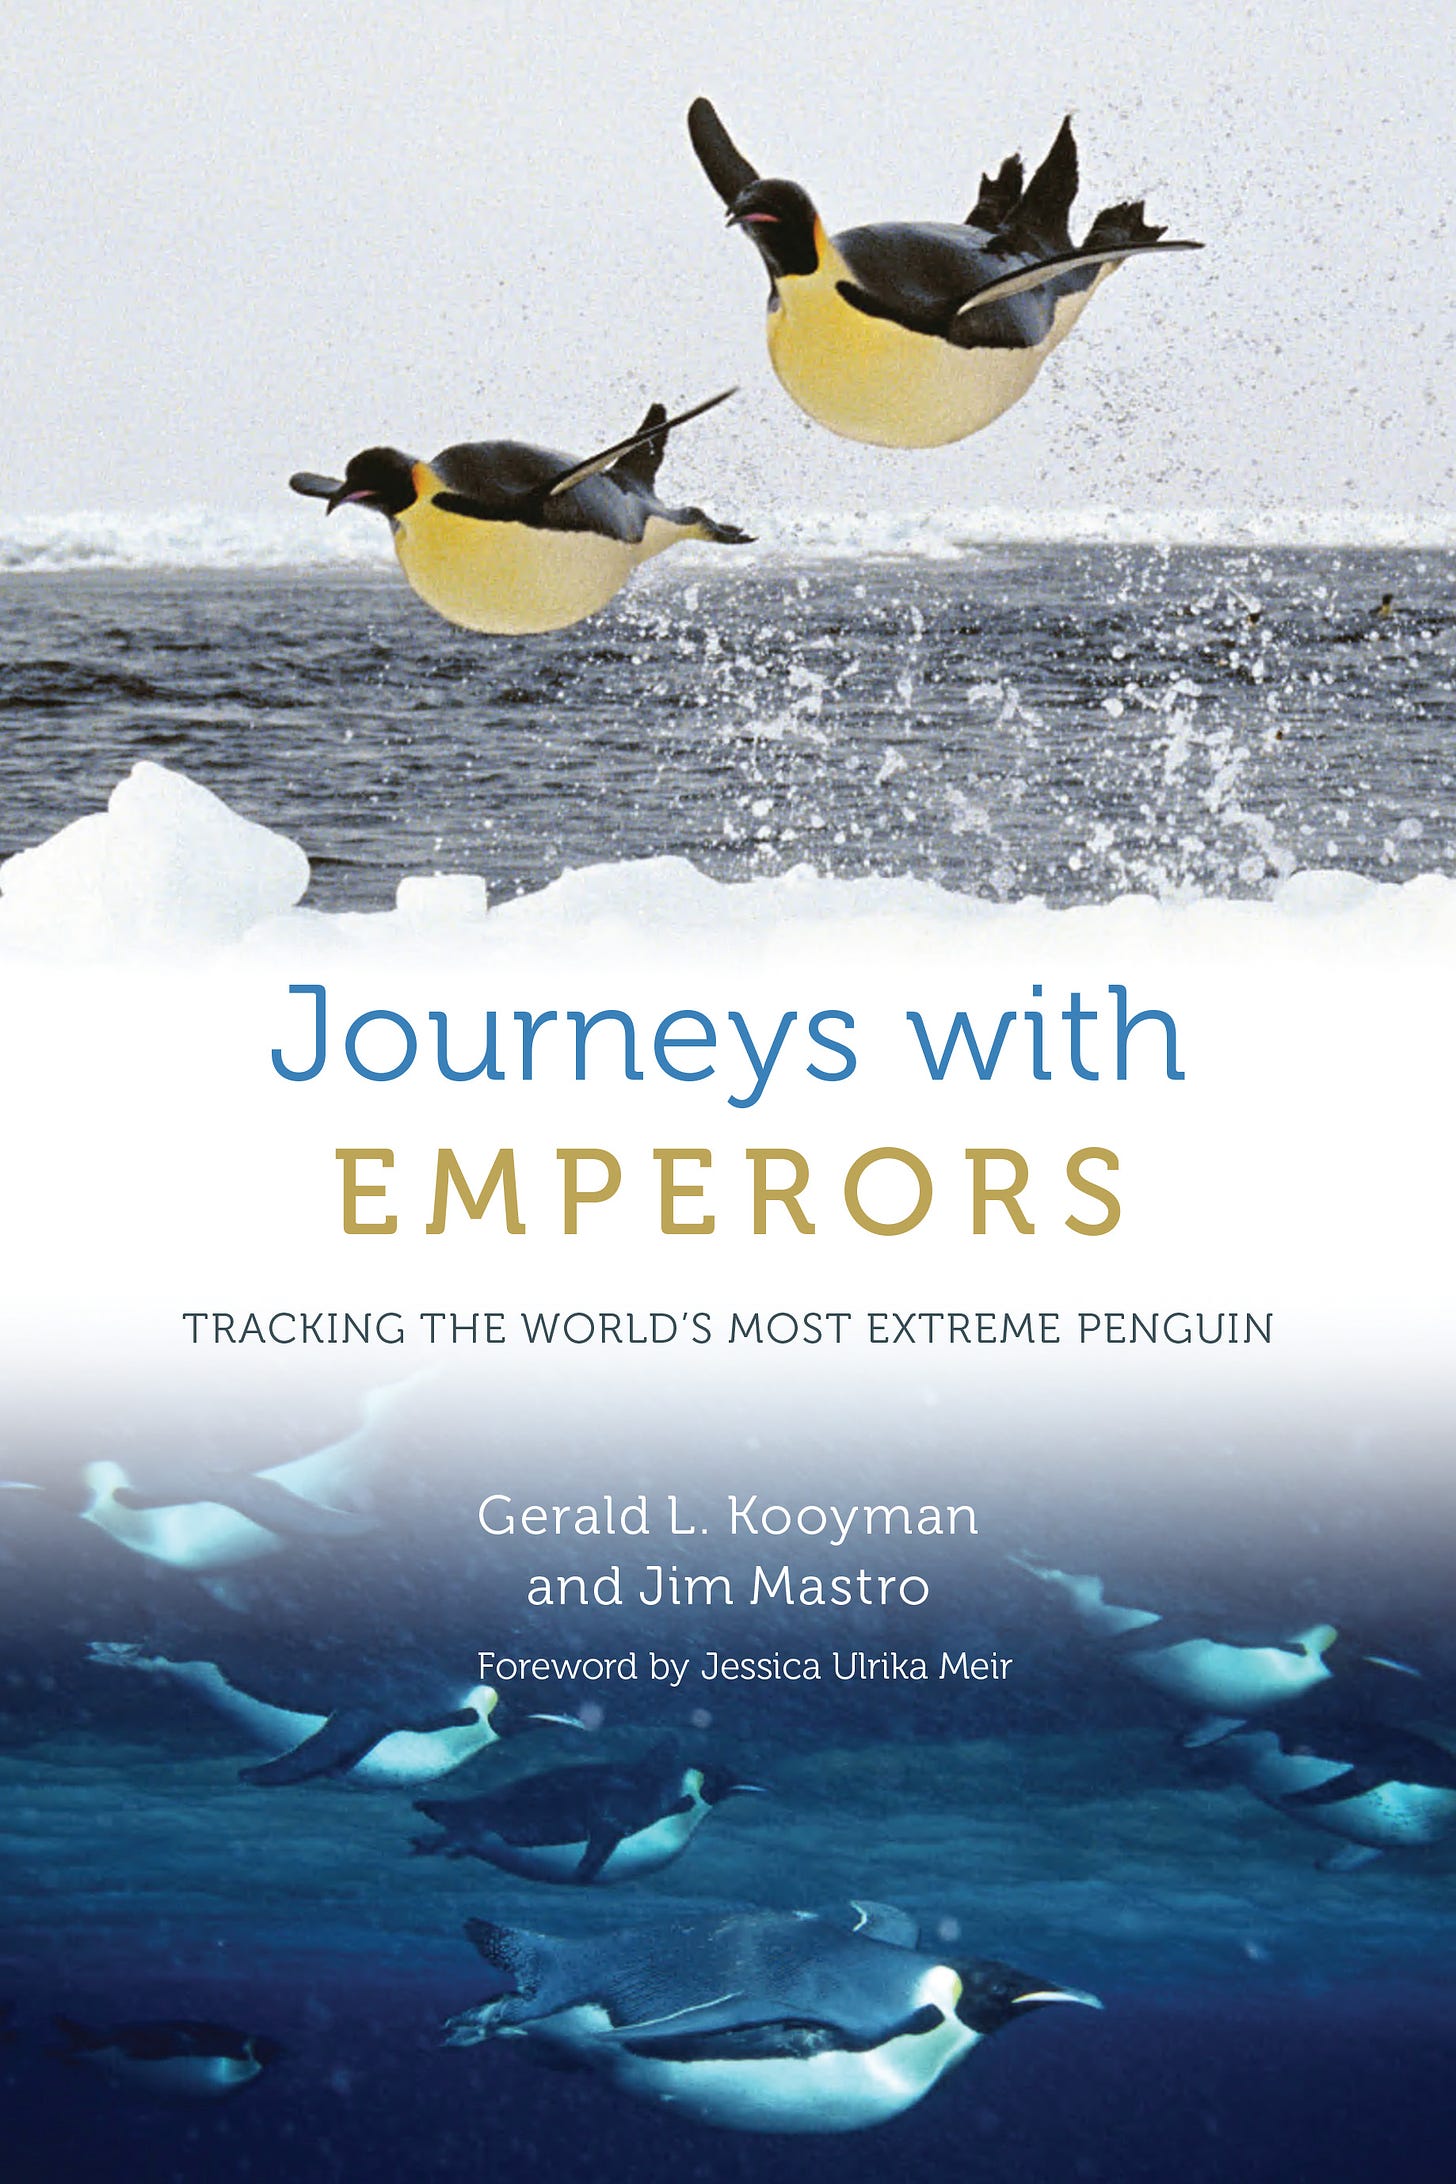 cover of this book shows emperor penguins diving below and flying above the water